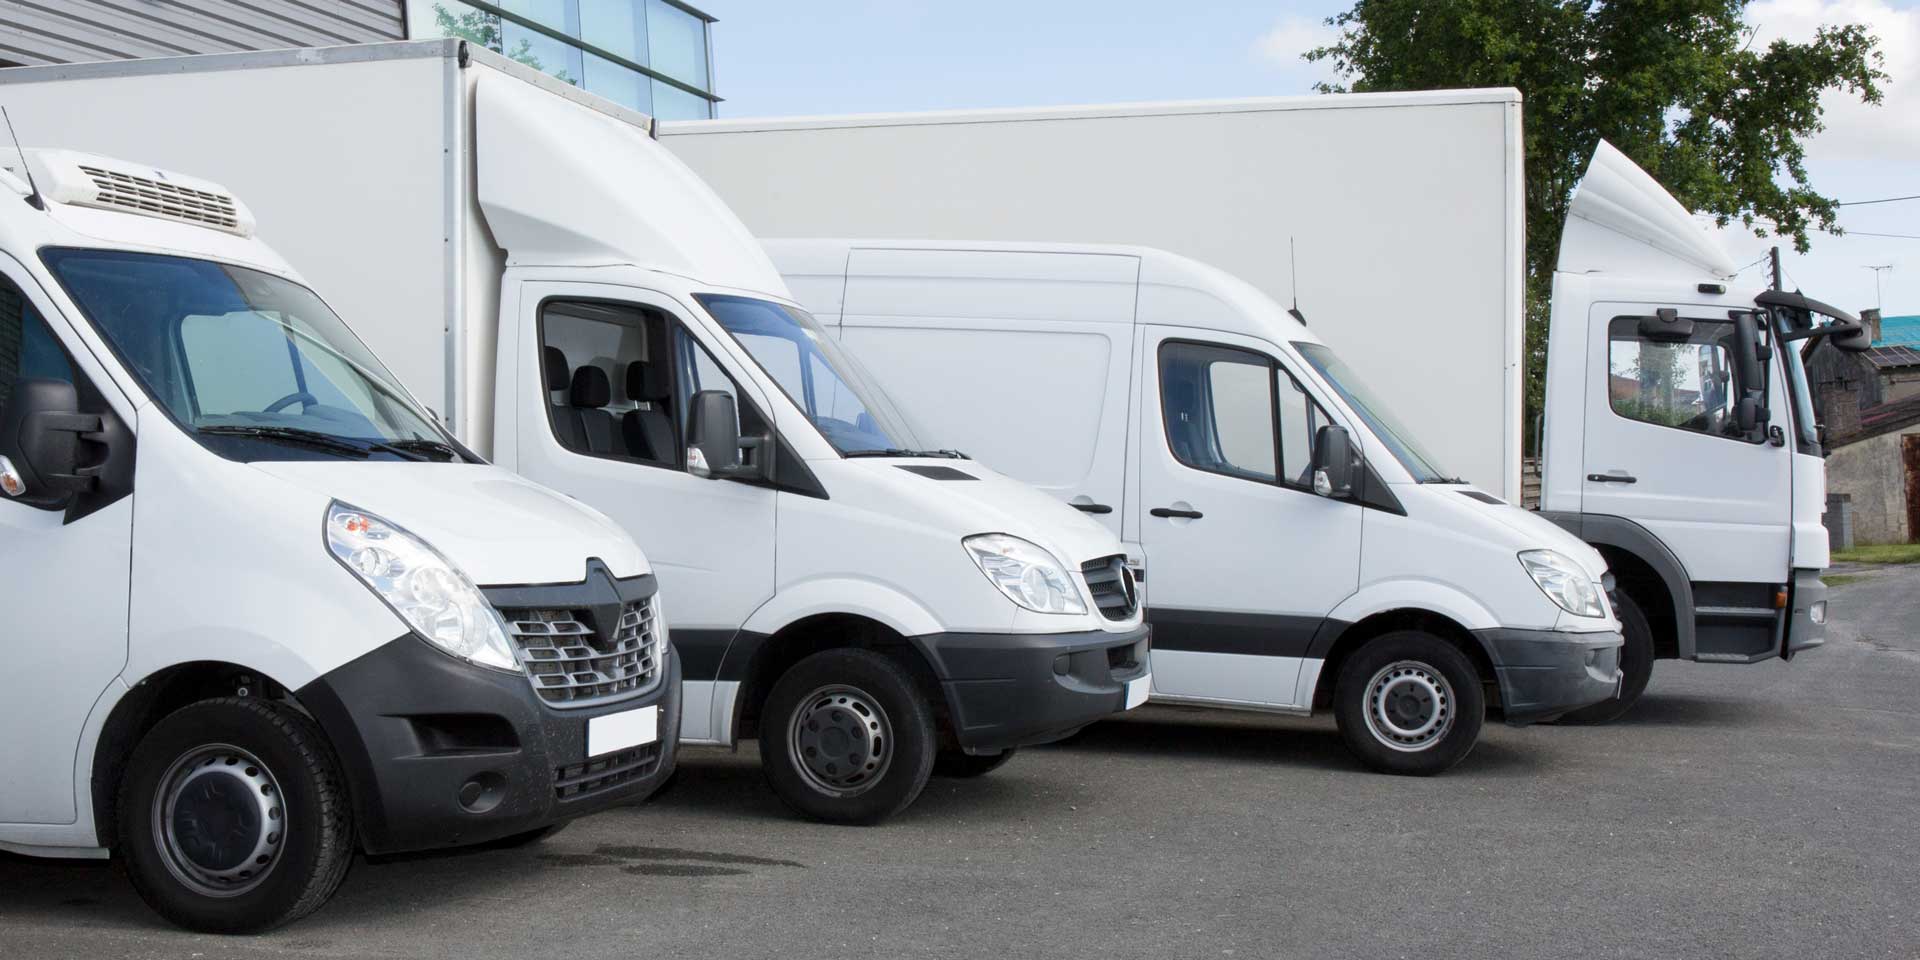 Interested in Commercial Vehicle Rental?